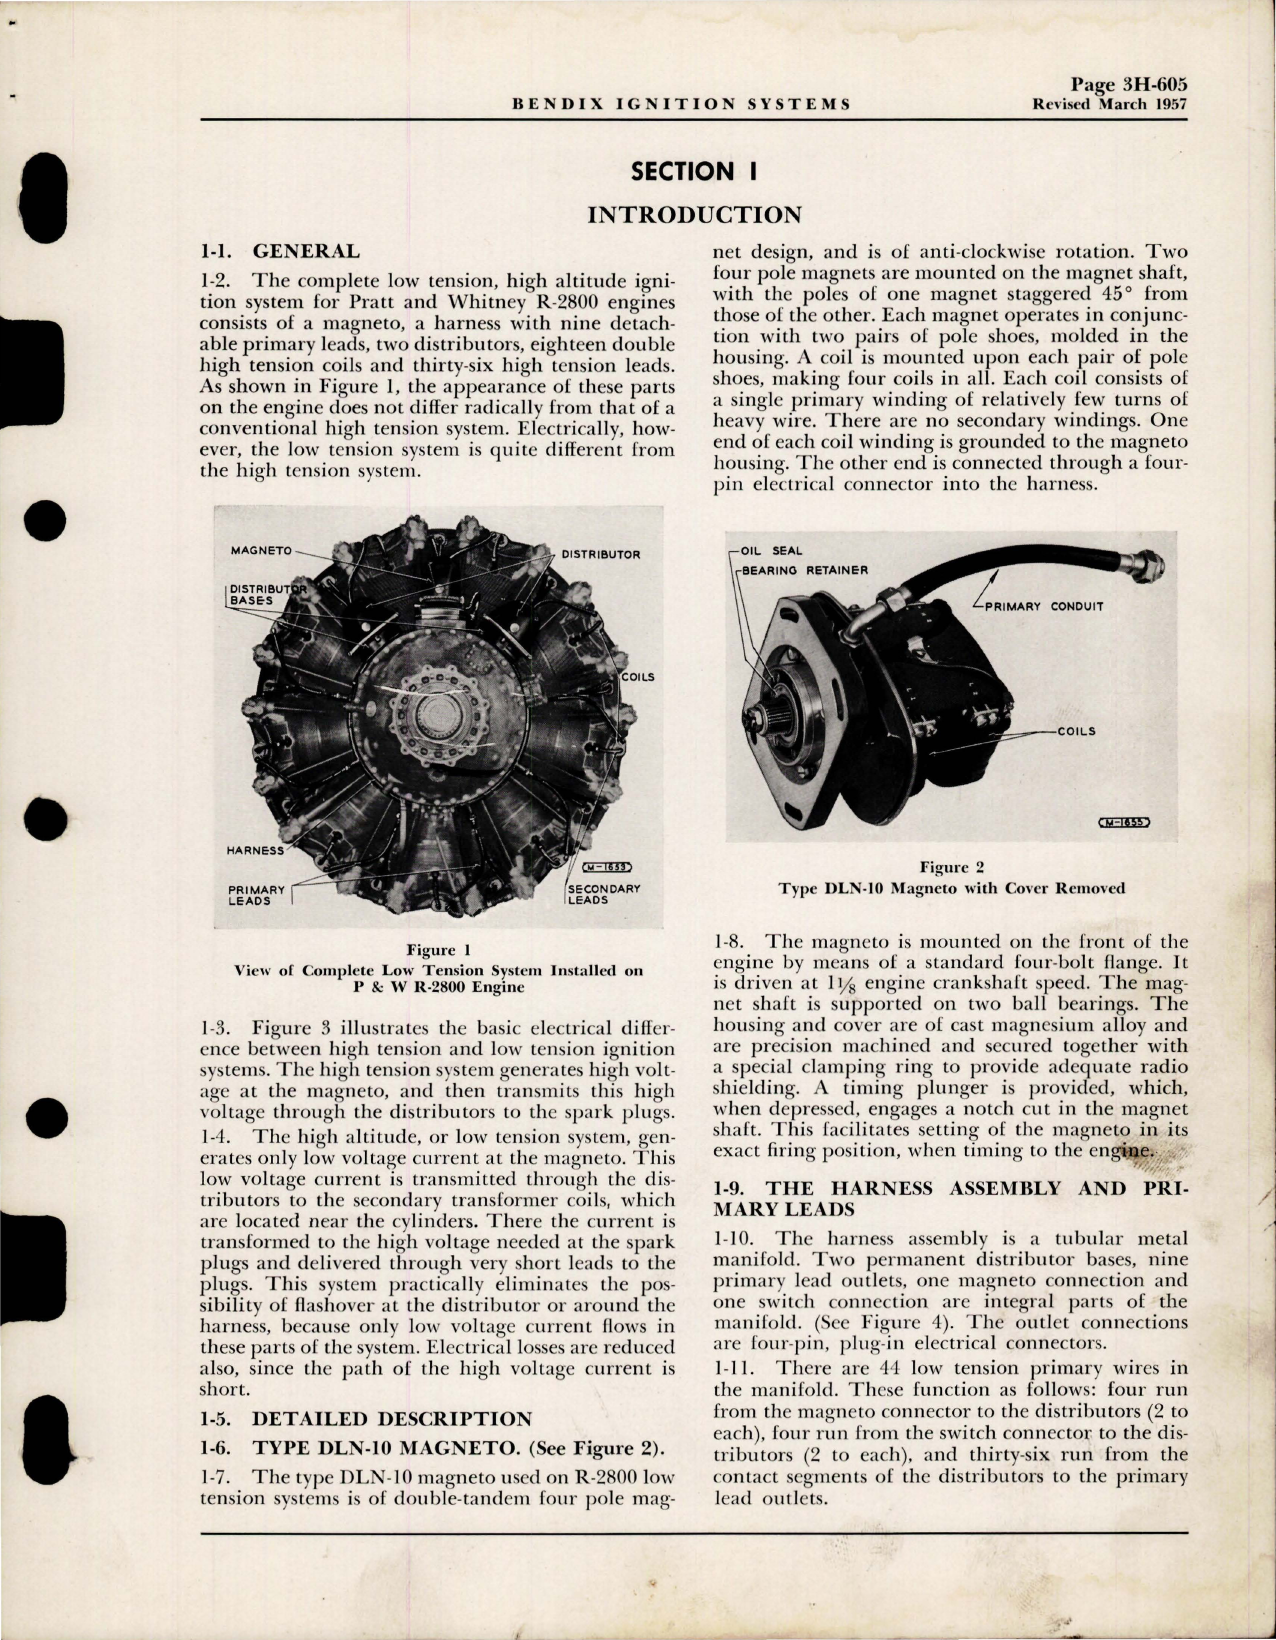 Sample page 5 from AirCorps Library document: Overhaul Instructions for Bendix Low Tension High Altitude Ignition System